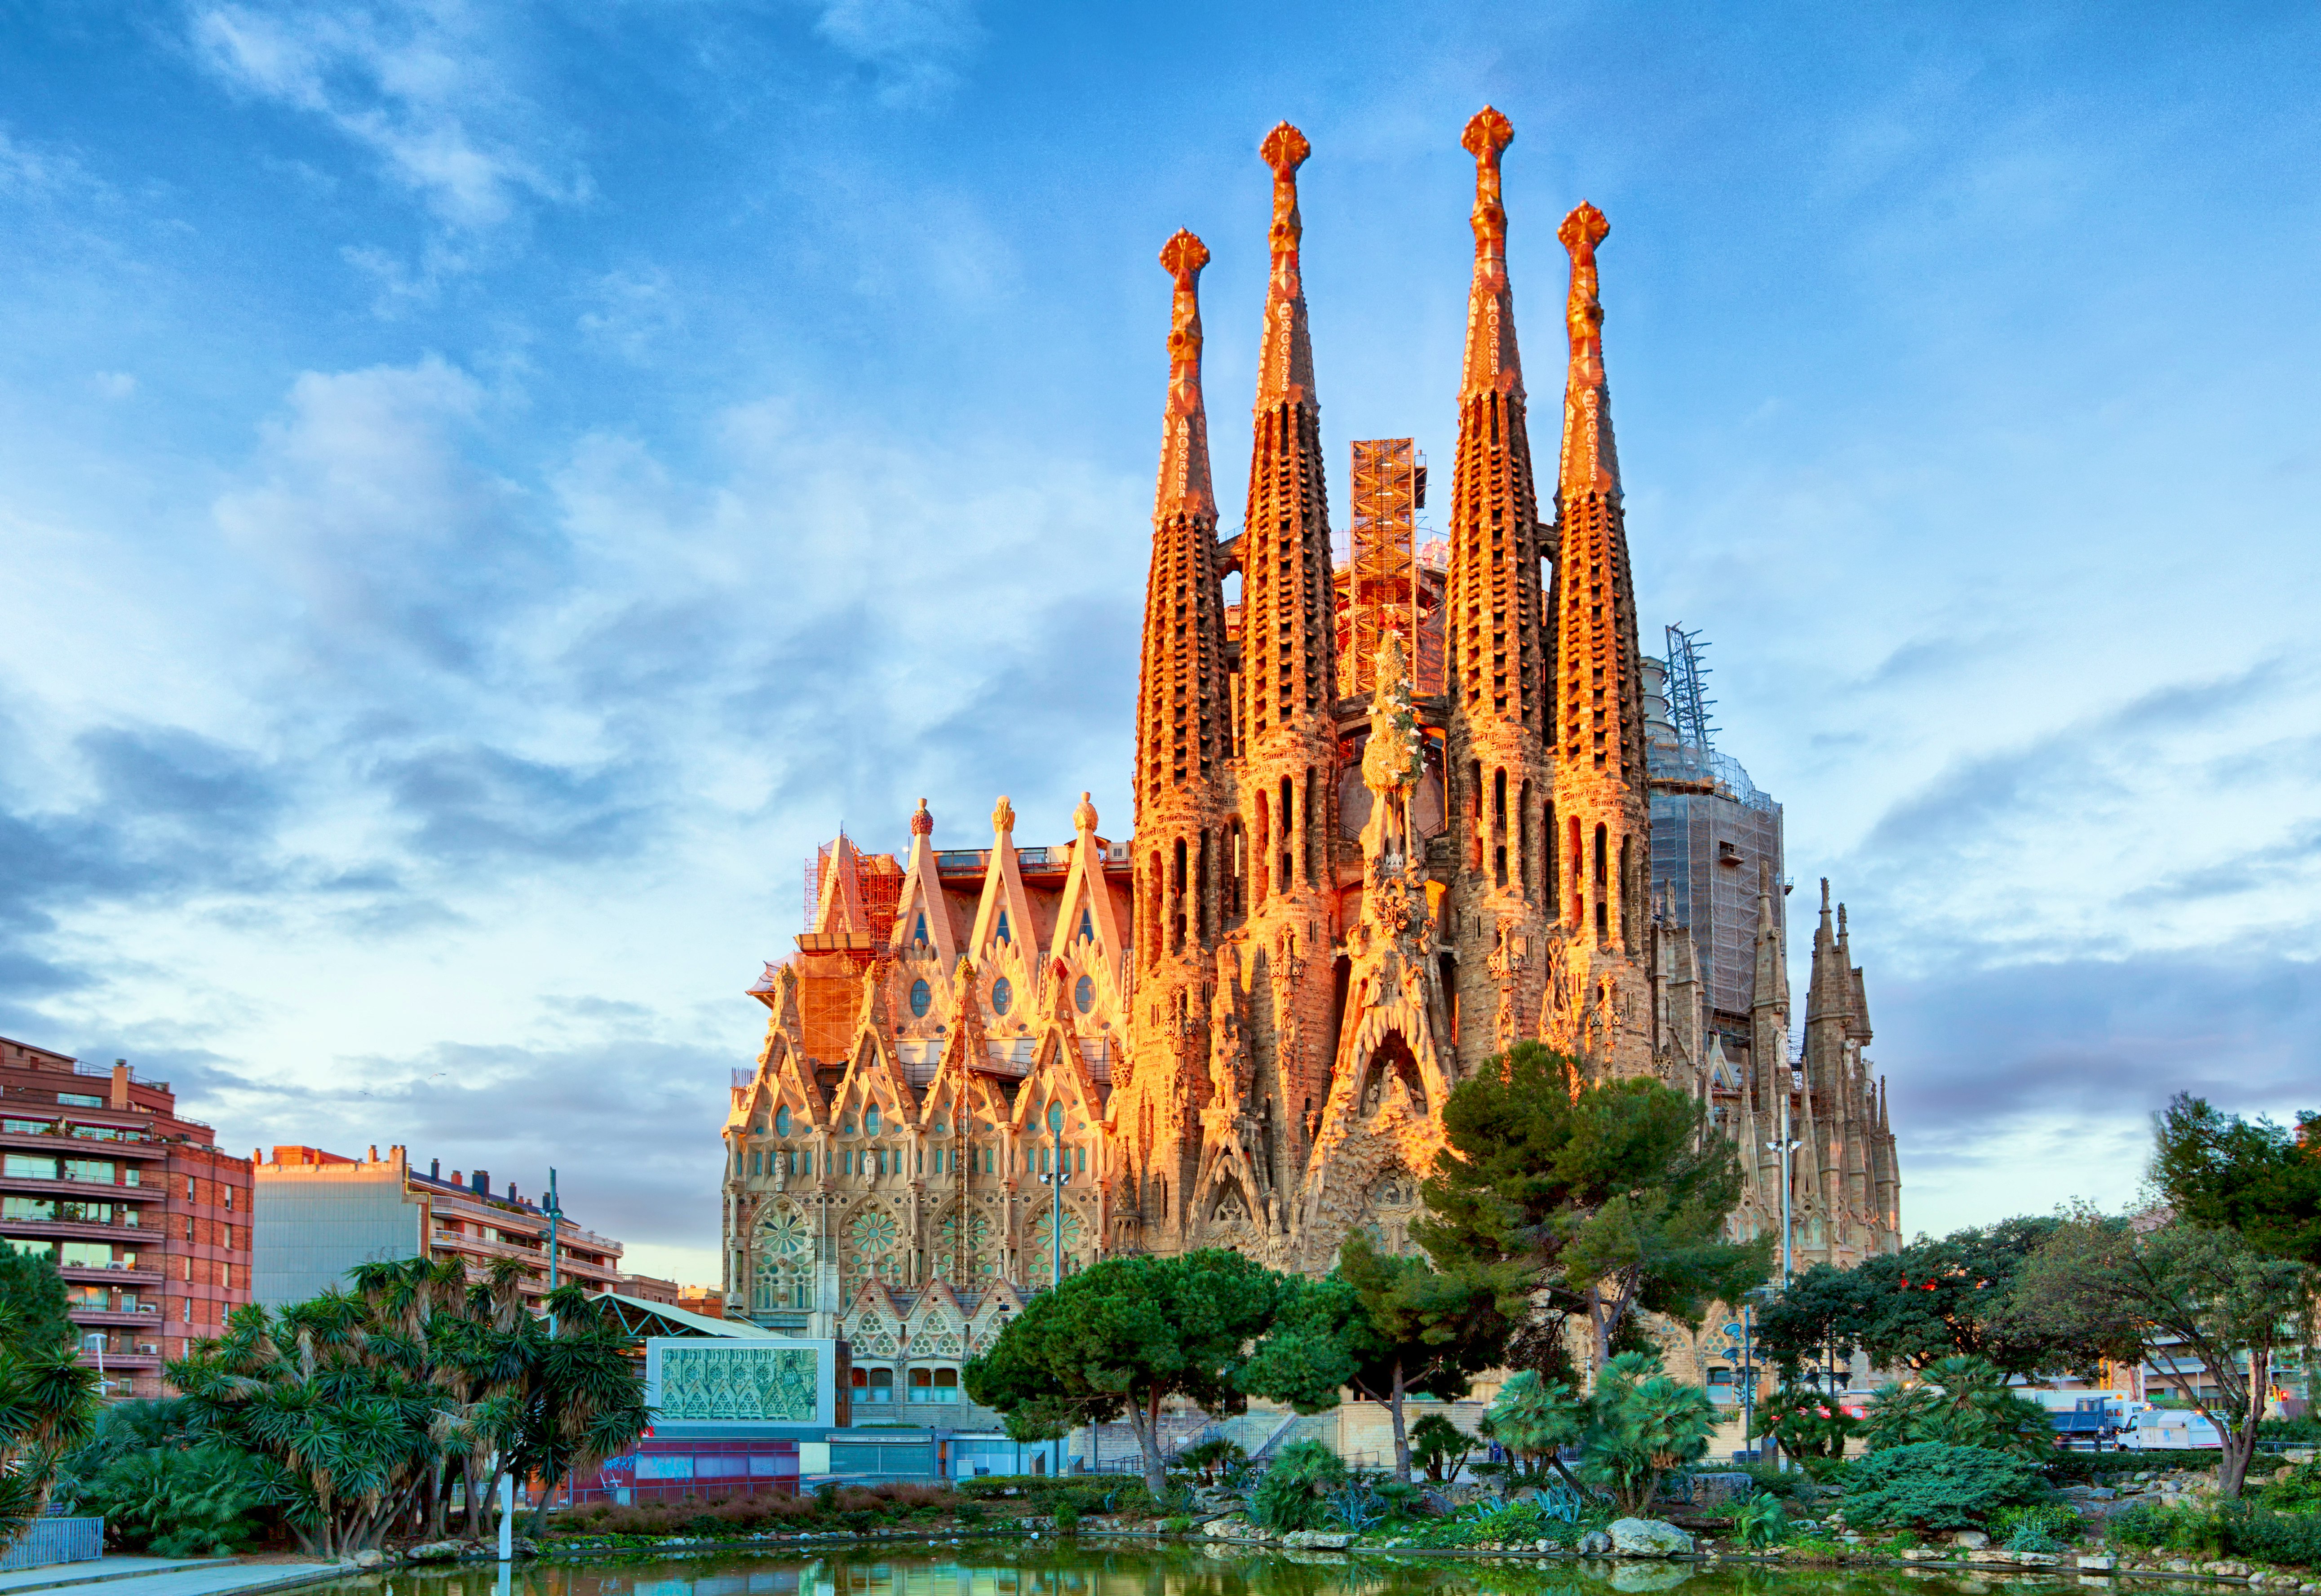 BARCELONA, SPAIN - FEBRUARY 10: La Sagrada Familia - the impressive cathedral designed by Gaudi, which is being build since 19 March 1882 and is not finished yet February 10, 2016 in Barcelona, Spain. – © TTstudio - Fotolia